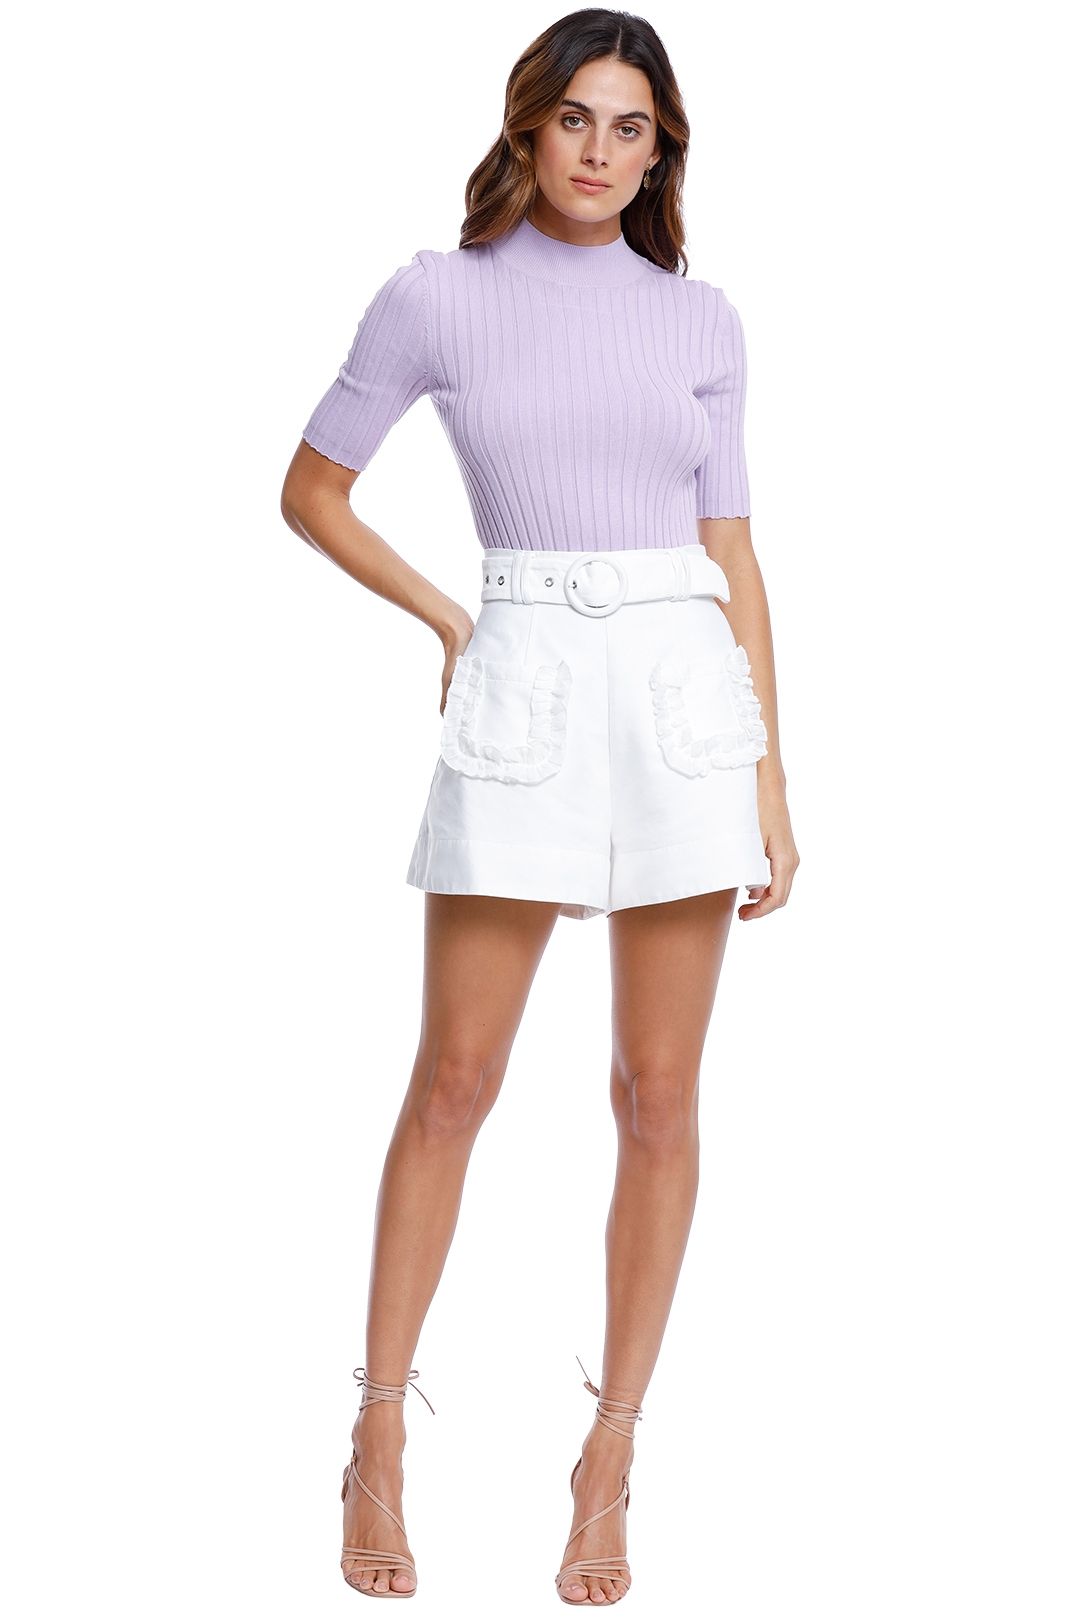 Significant Other Ariana Short Sleeve Lilac Knit Top purple